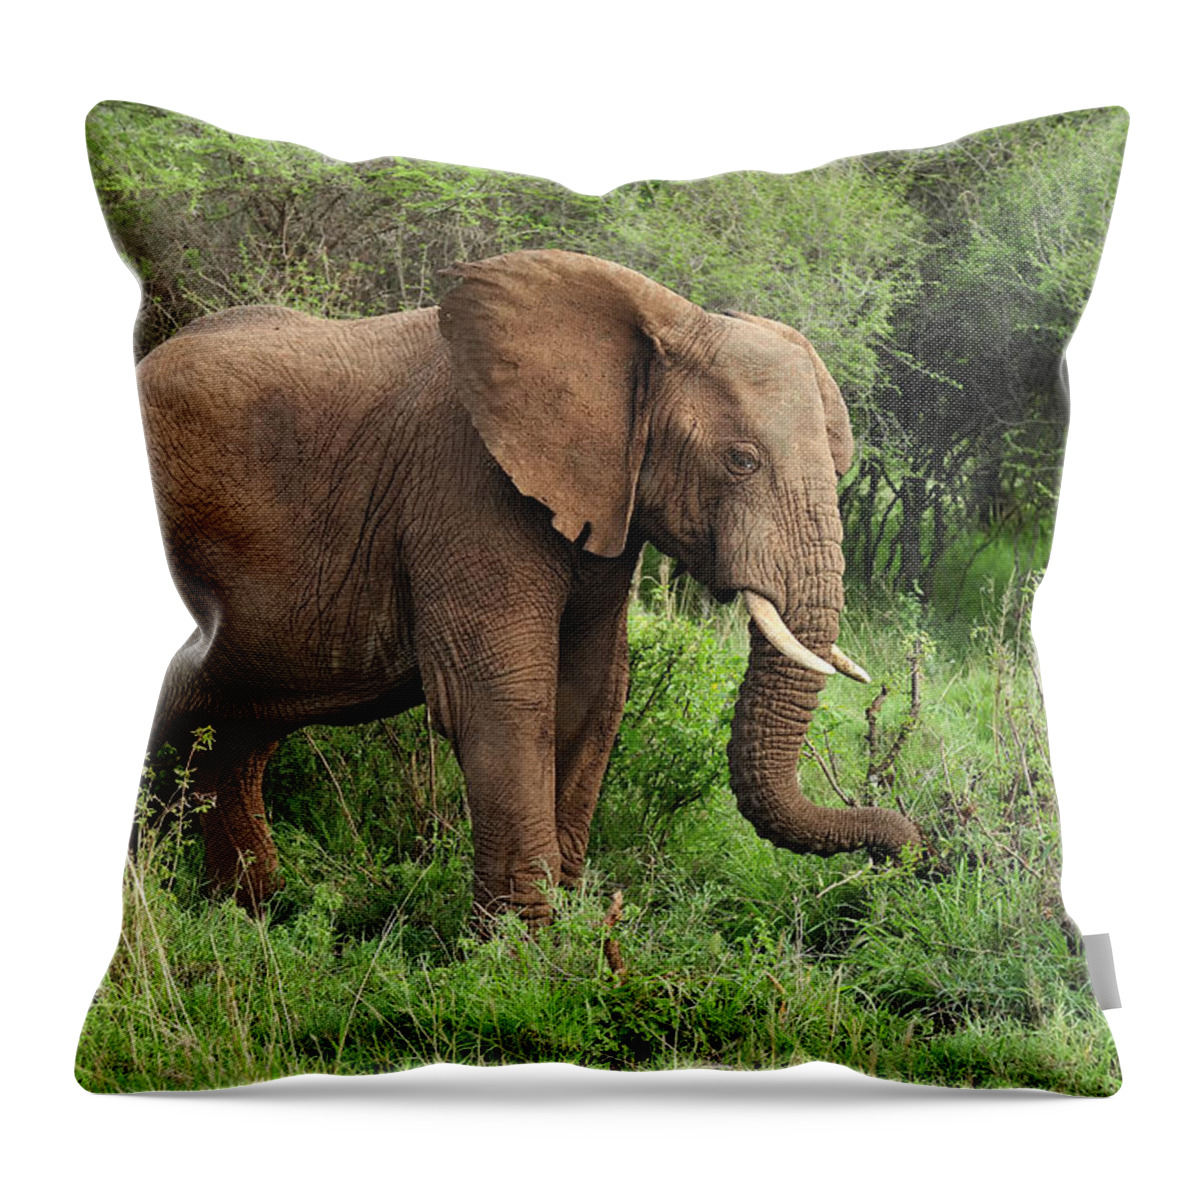 Thomas Marent Throw Pillow featuring the photograph African Elephant Grazing Serengeti by Thomas Marent